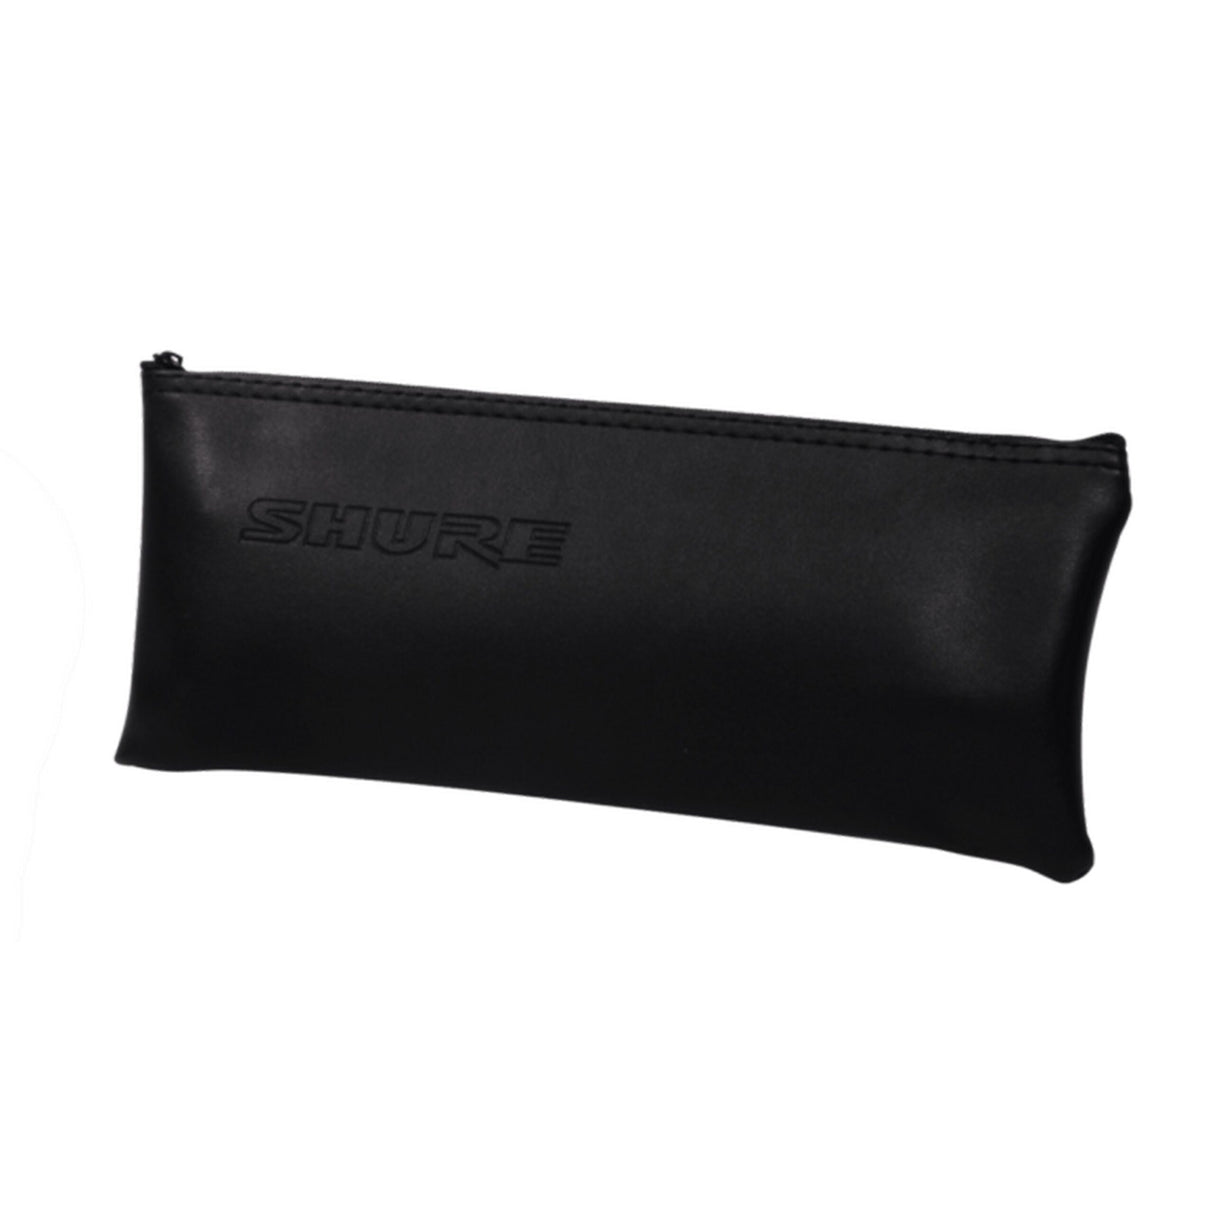 Shure 95C2313 Storage Pouch for Shure Microphones